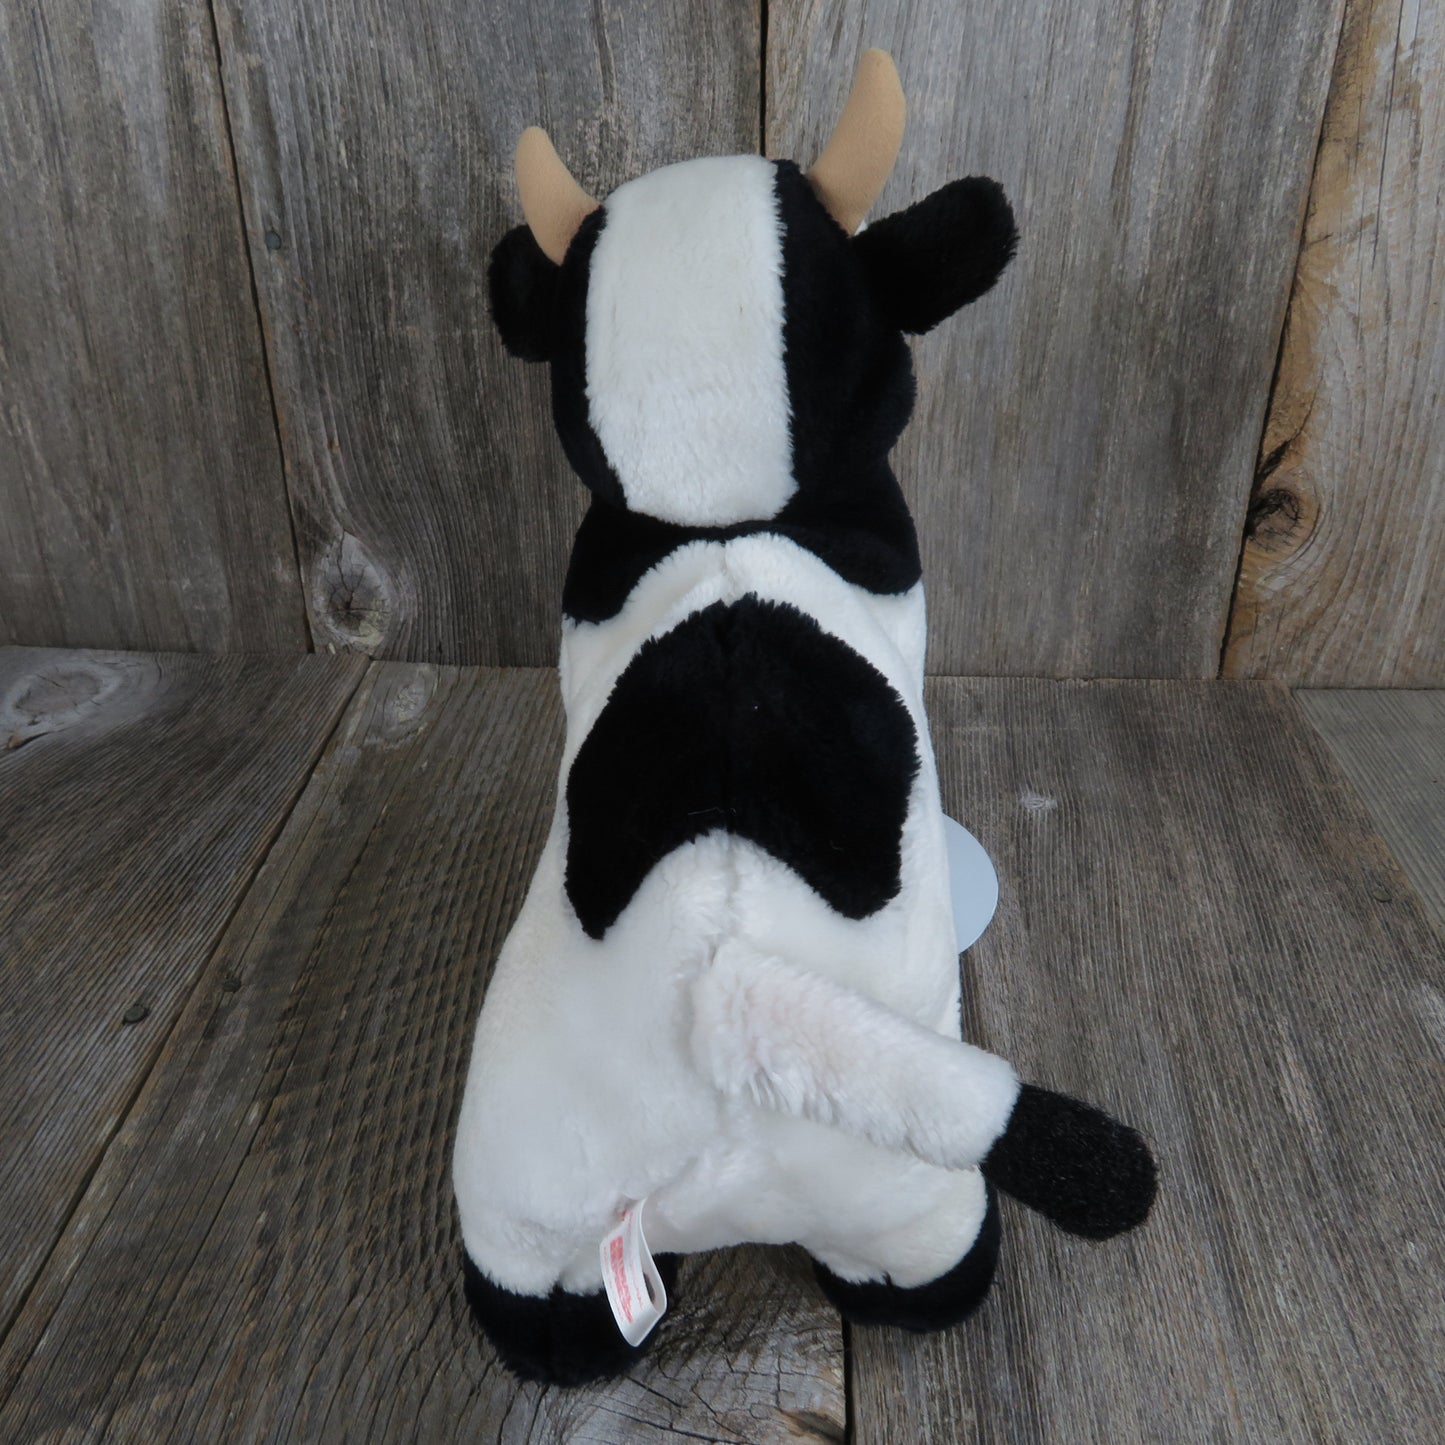 Vintage Cow Puppet Black and White Plush Jersey Holstein Full Body Animal Express 1978